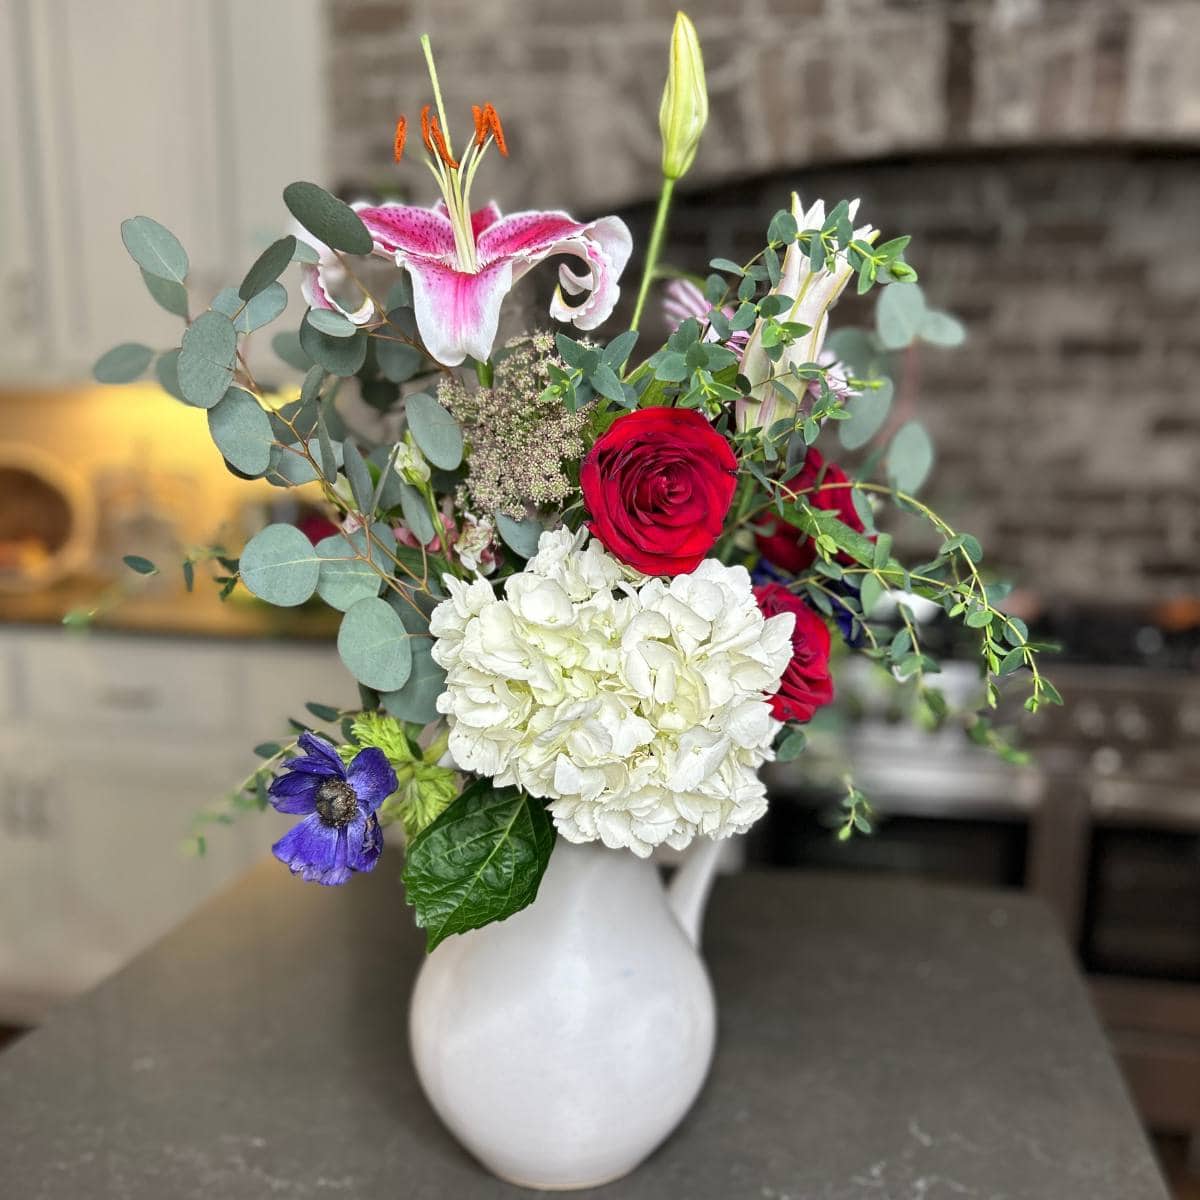 5 Tips to Refresh Your Cut Flower  Bouquet